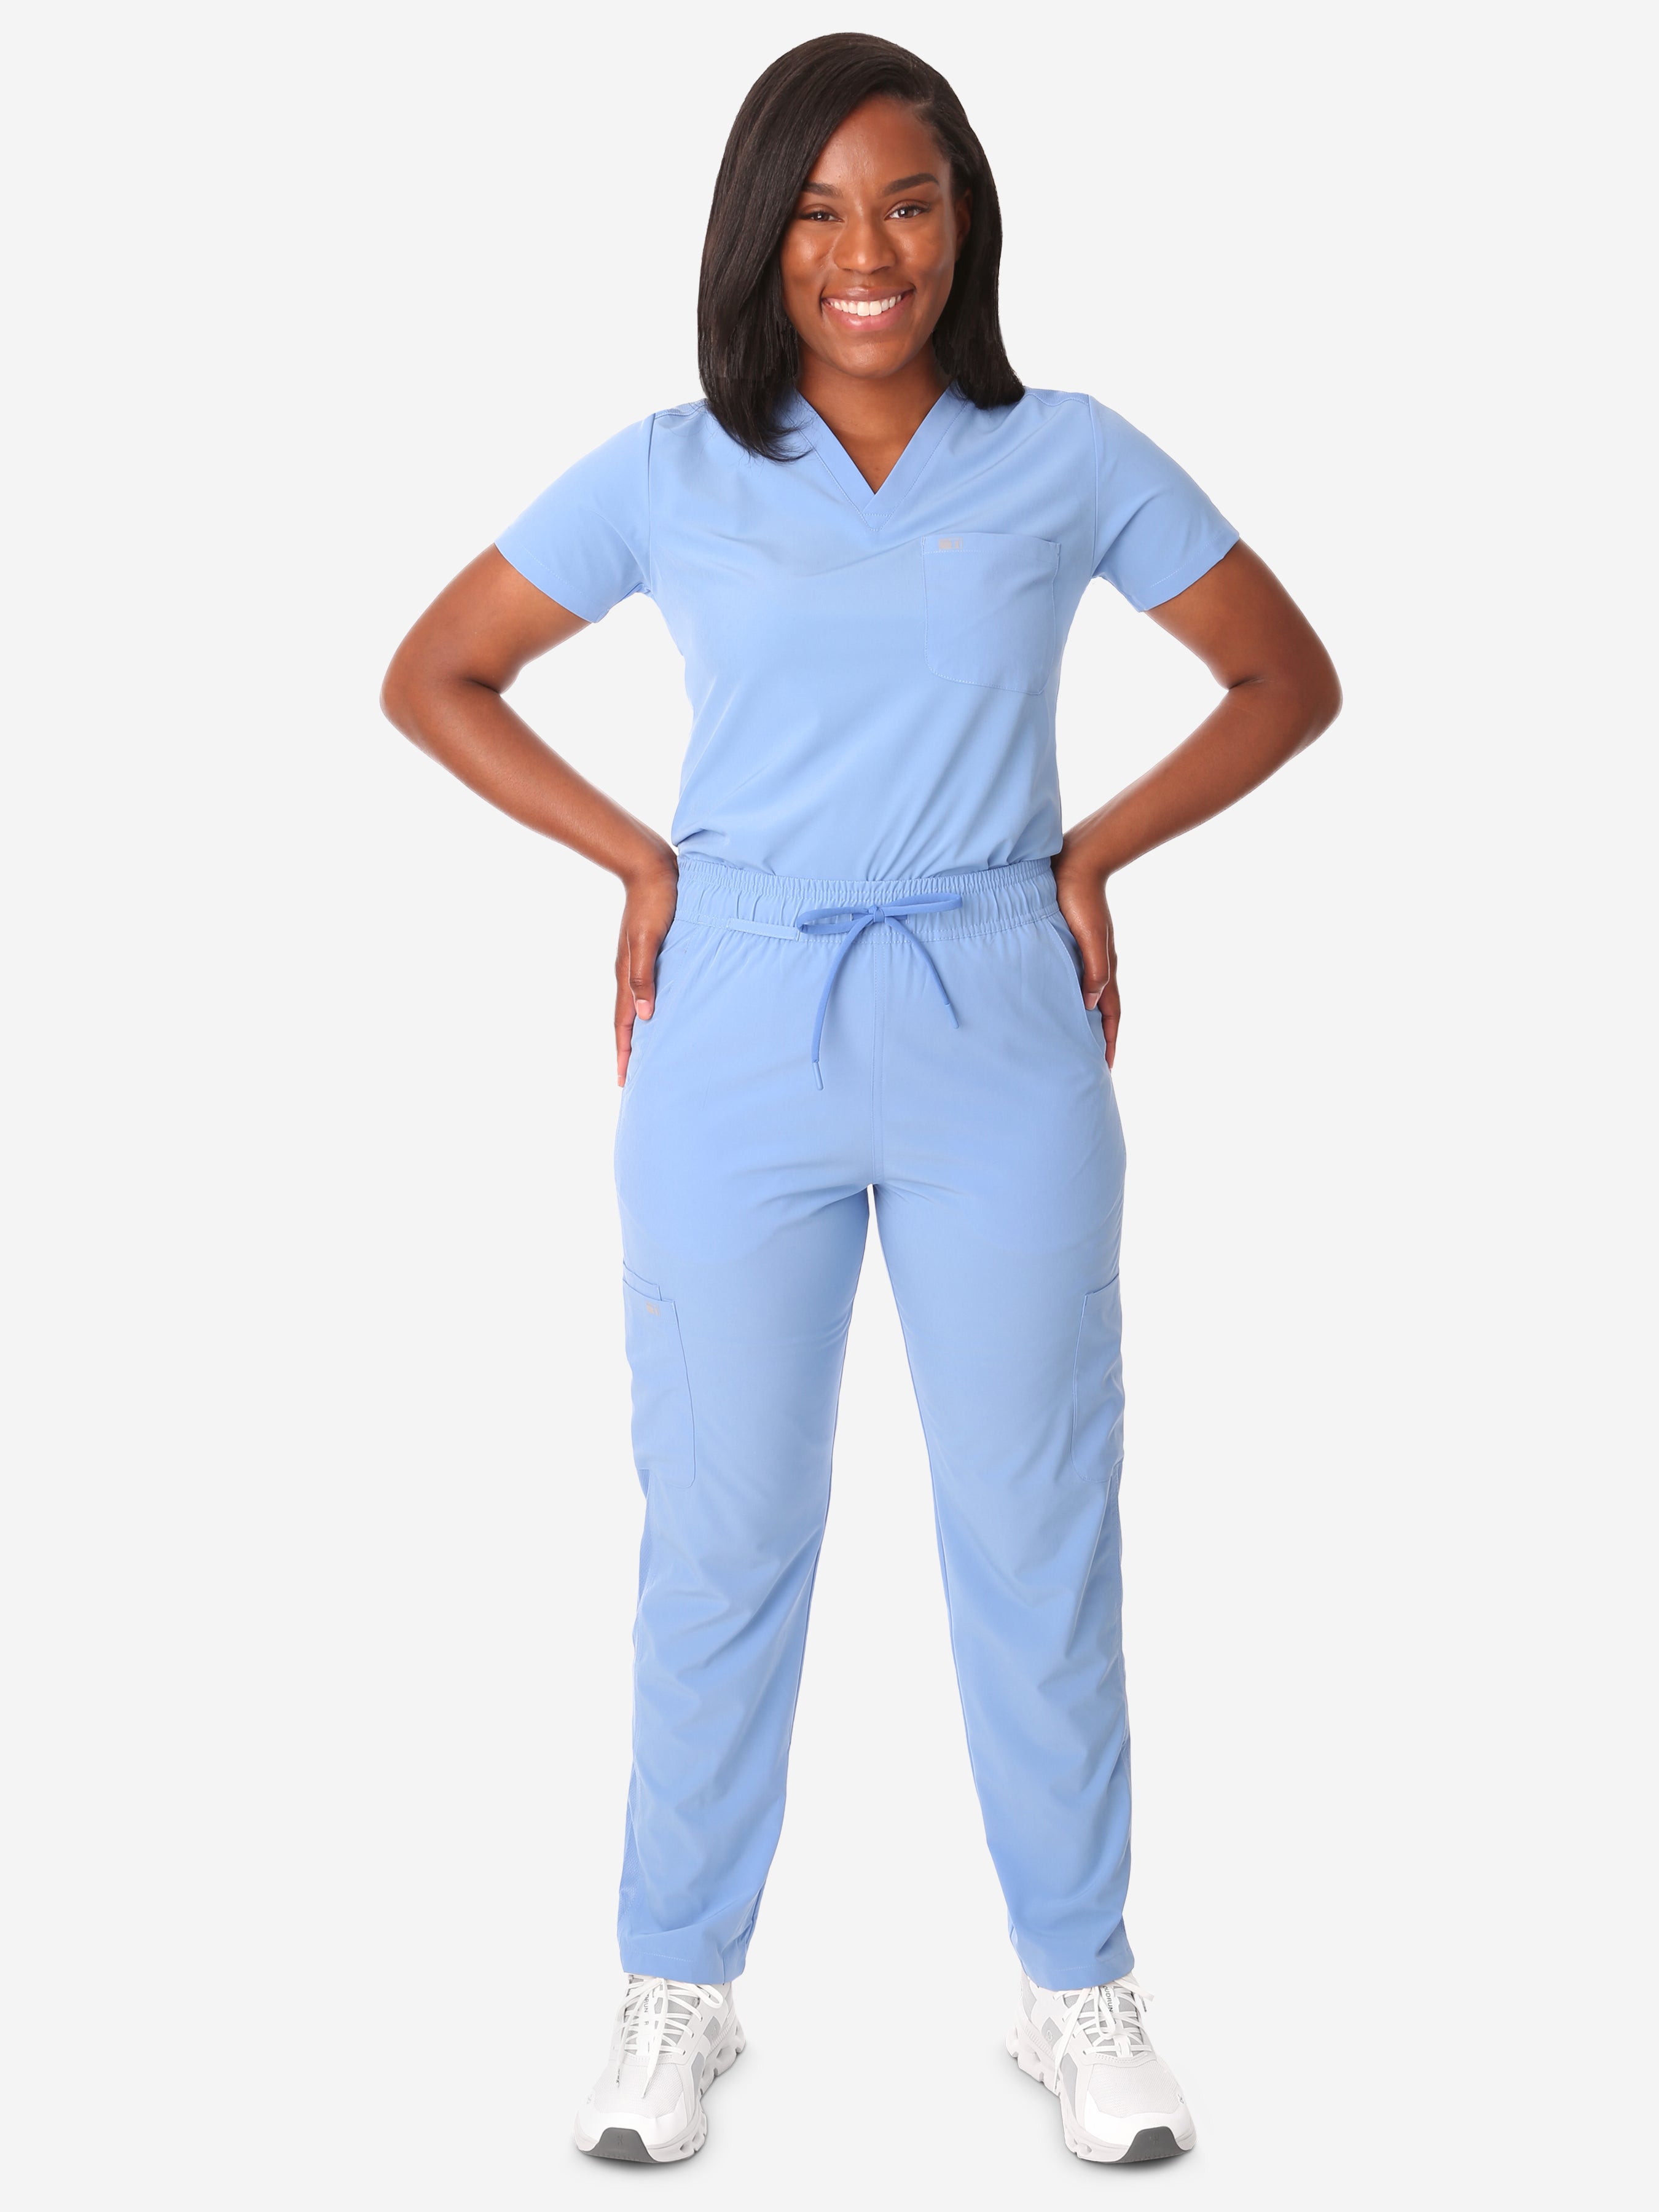 TiScrubs Ceil Blue Women&#39;s Stretch 9-Pocket Pants and One-Pocket Tuckable Top Front View Full Body